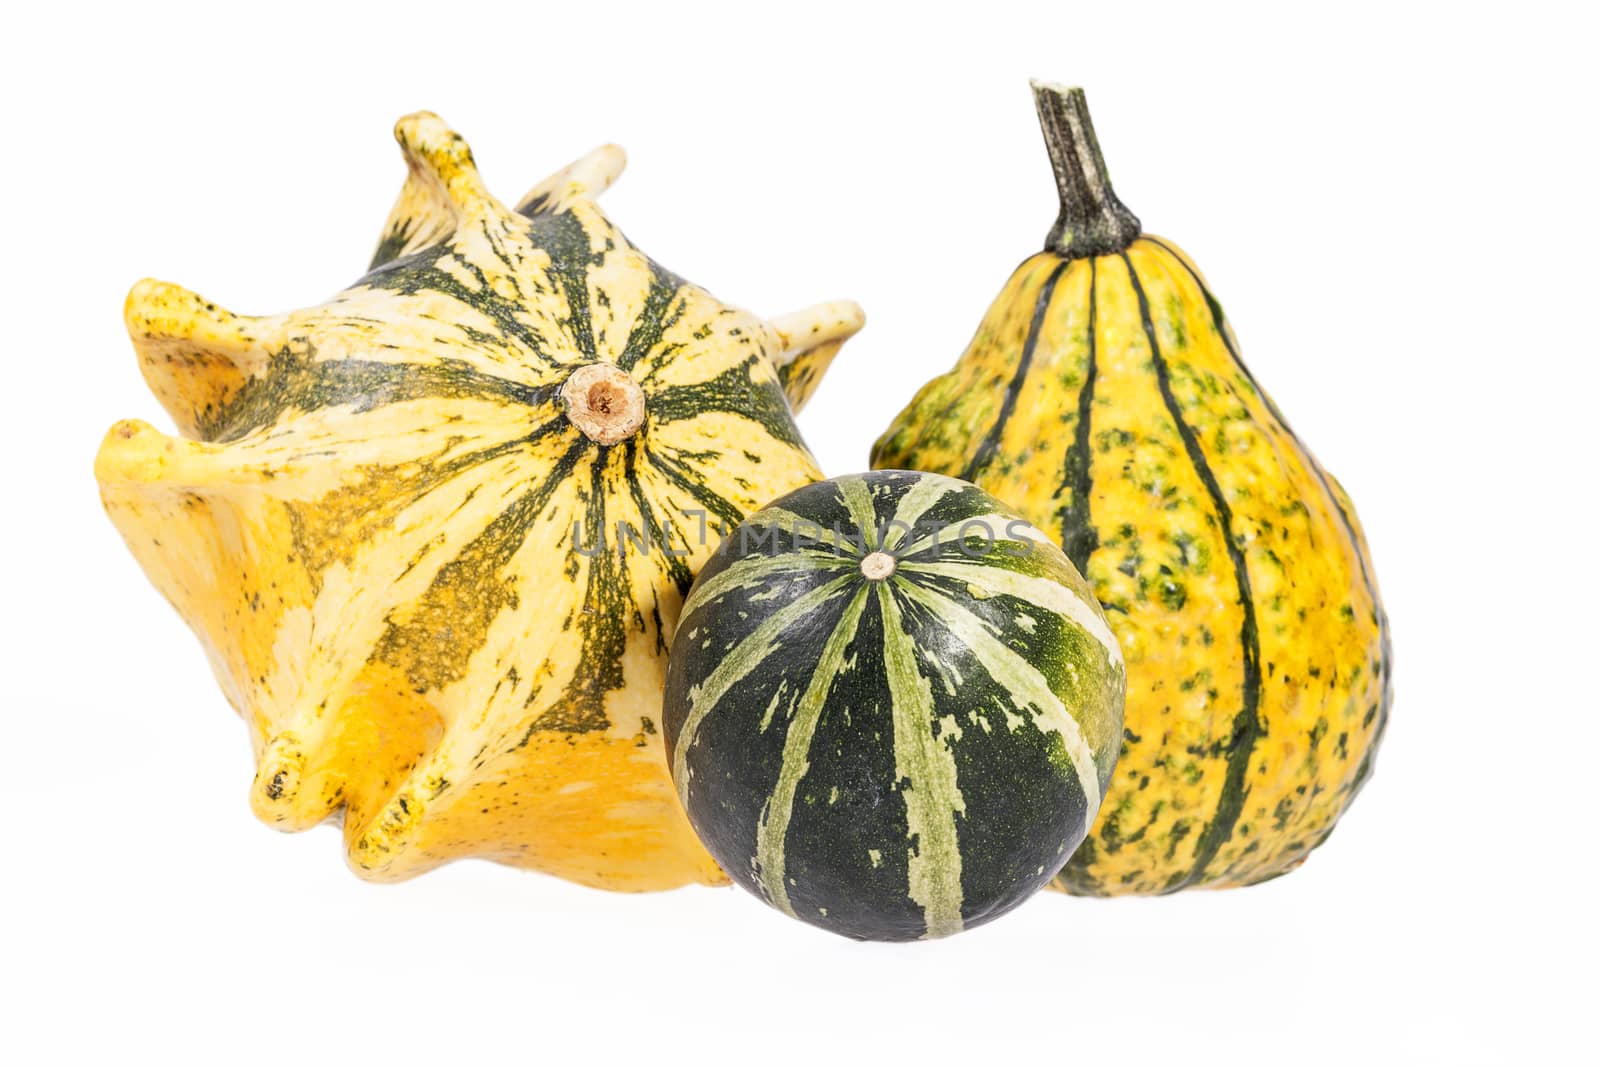 Vegetables of pumpkin decorative isolated on white background by mychadre77